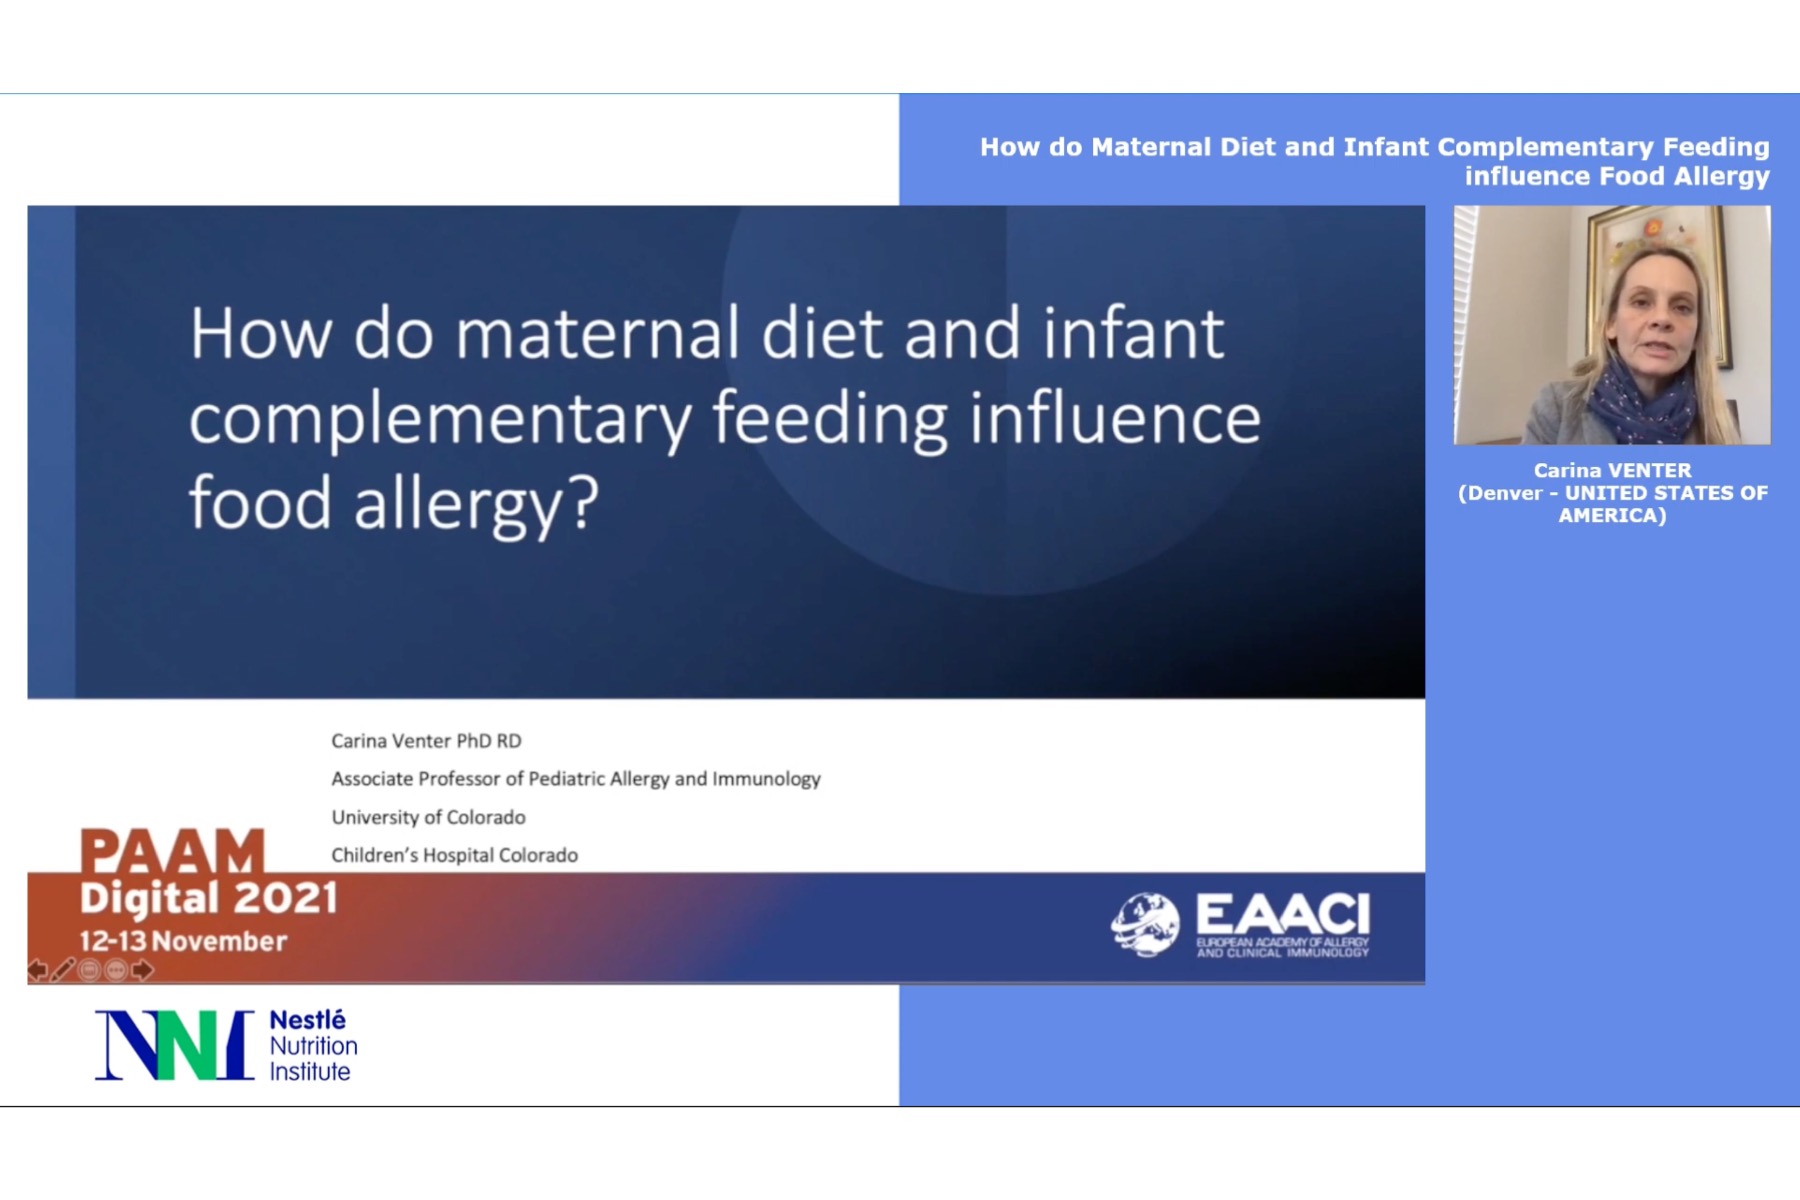 How do Maternal Diet and Infant Complementary Feeding influence Food Allergy